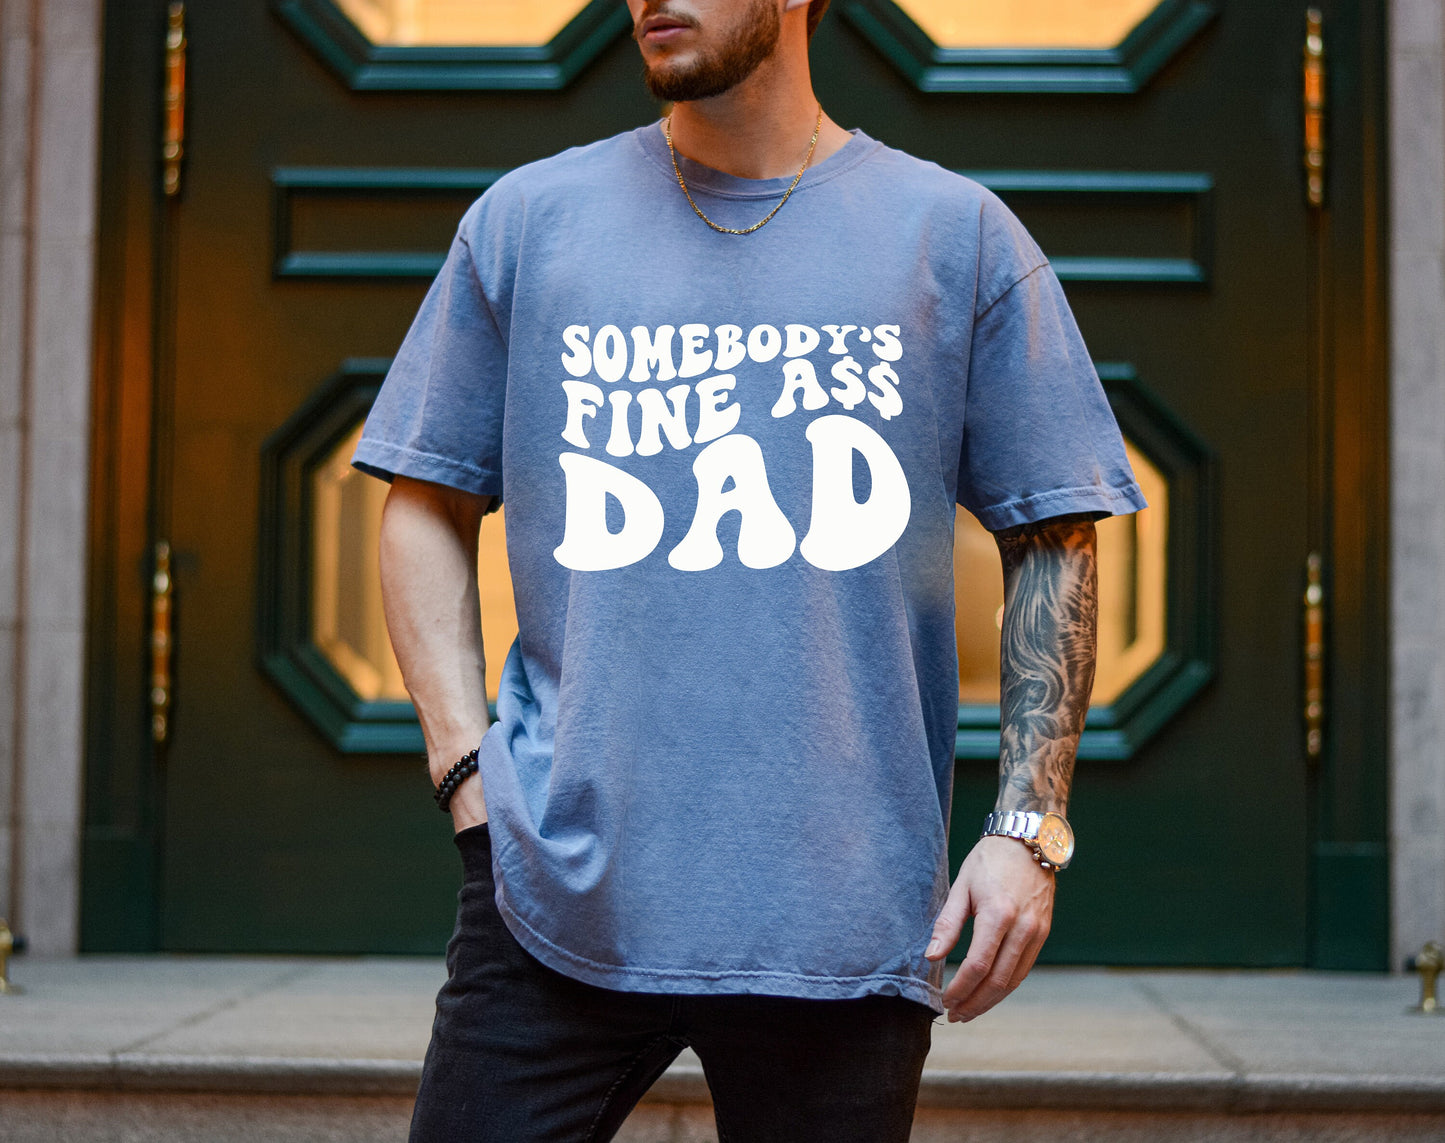 Somebody's Fine Ass Dad , Somebody's Fine Ass, Dad shirt, Funny Dad shirt, Dad T-Shirt , Funny shirt, fathers day, gifts for him